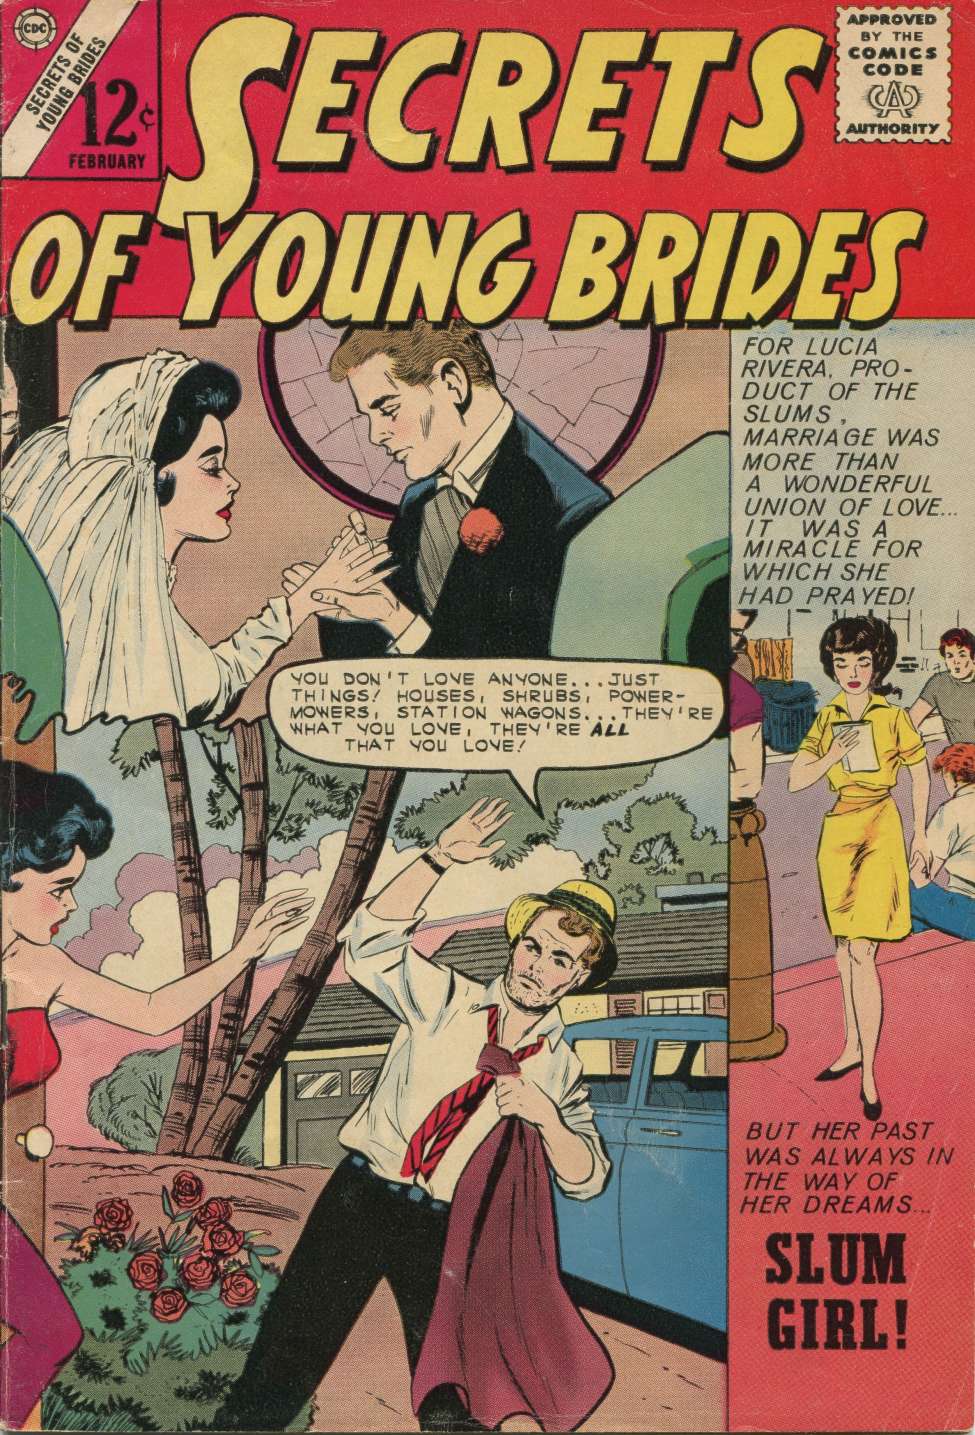 Book Cover For Secrets of Young Brides 35